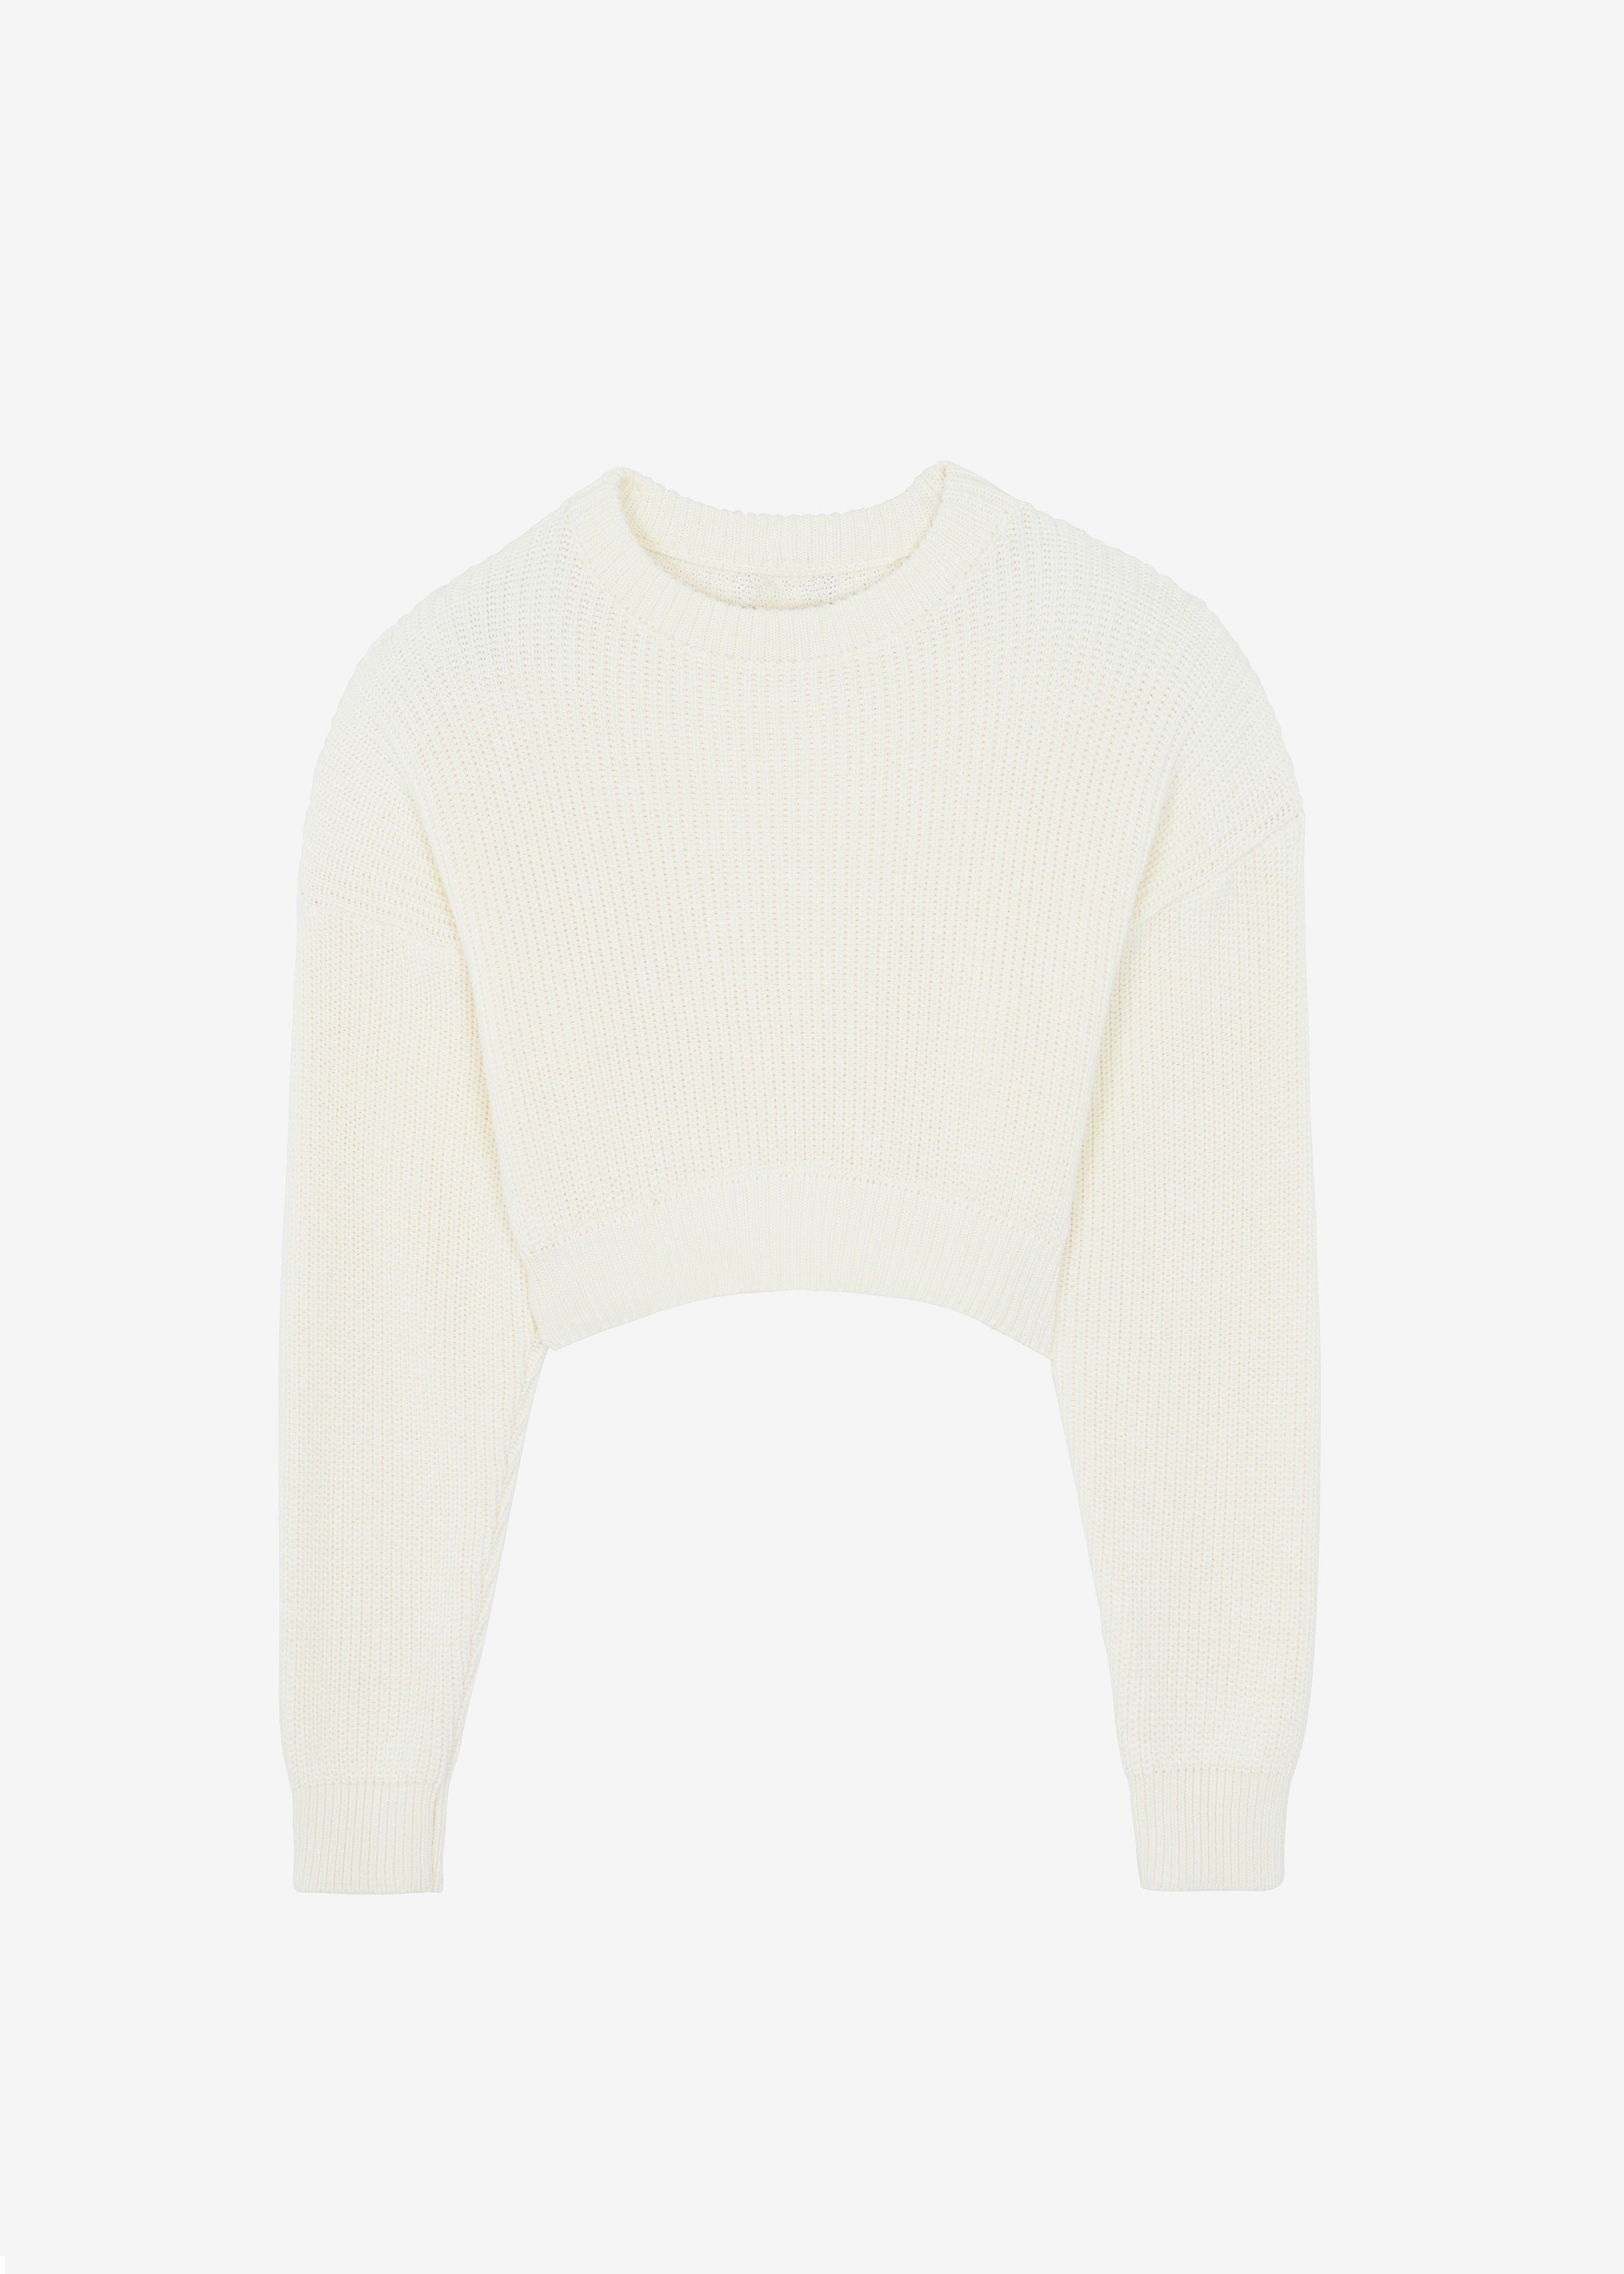 Teague Cropped Sweater - White - 6